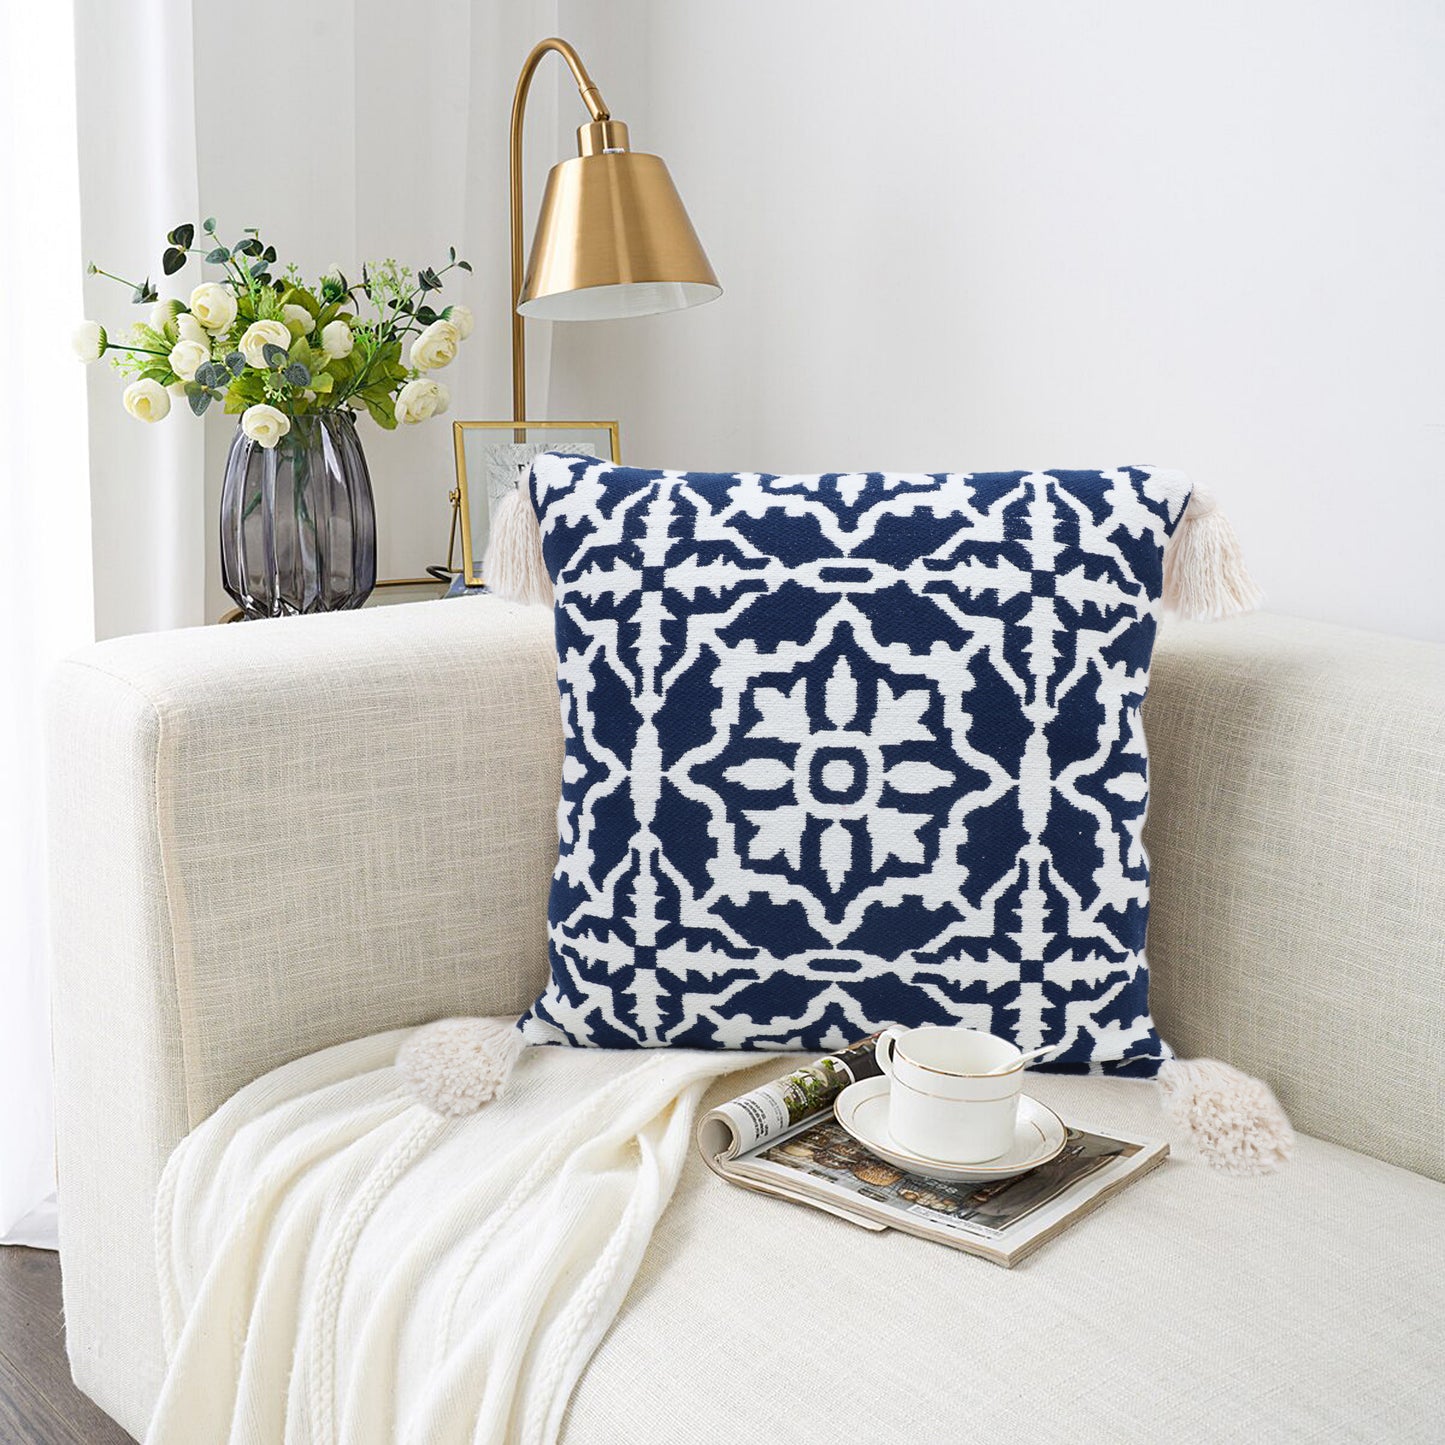 Blue Polyester/Cotton Jacquard Cushion Cover With Tassels